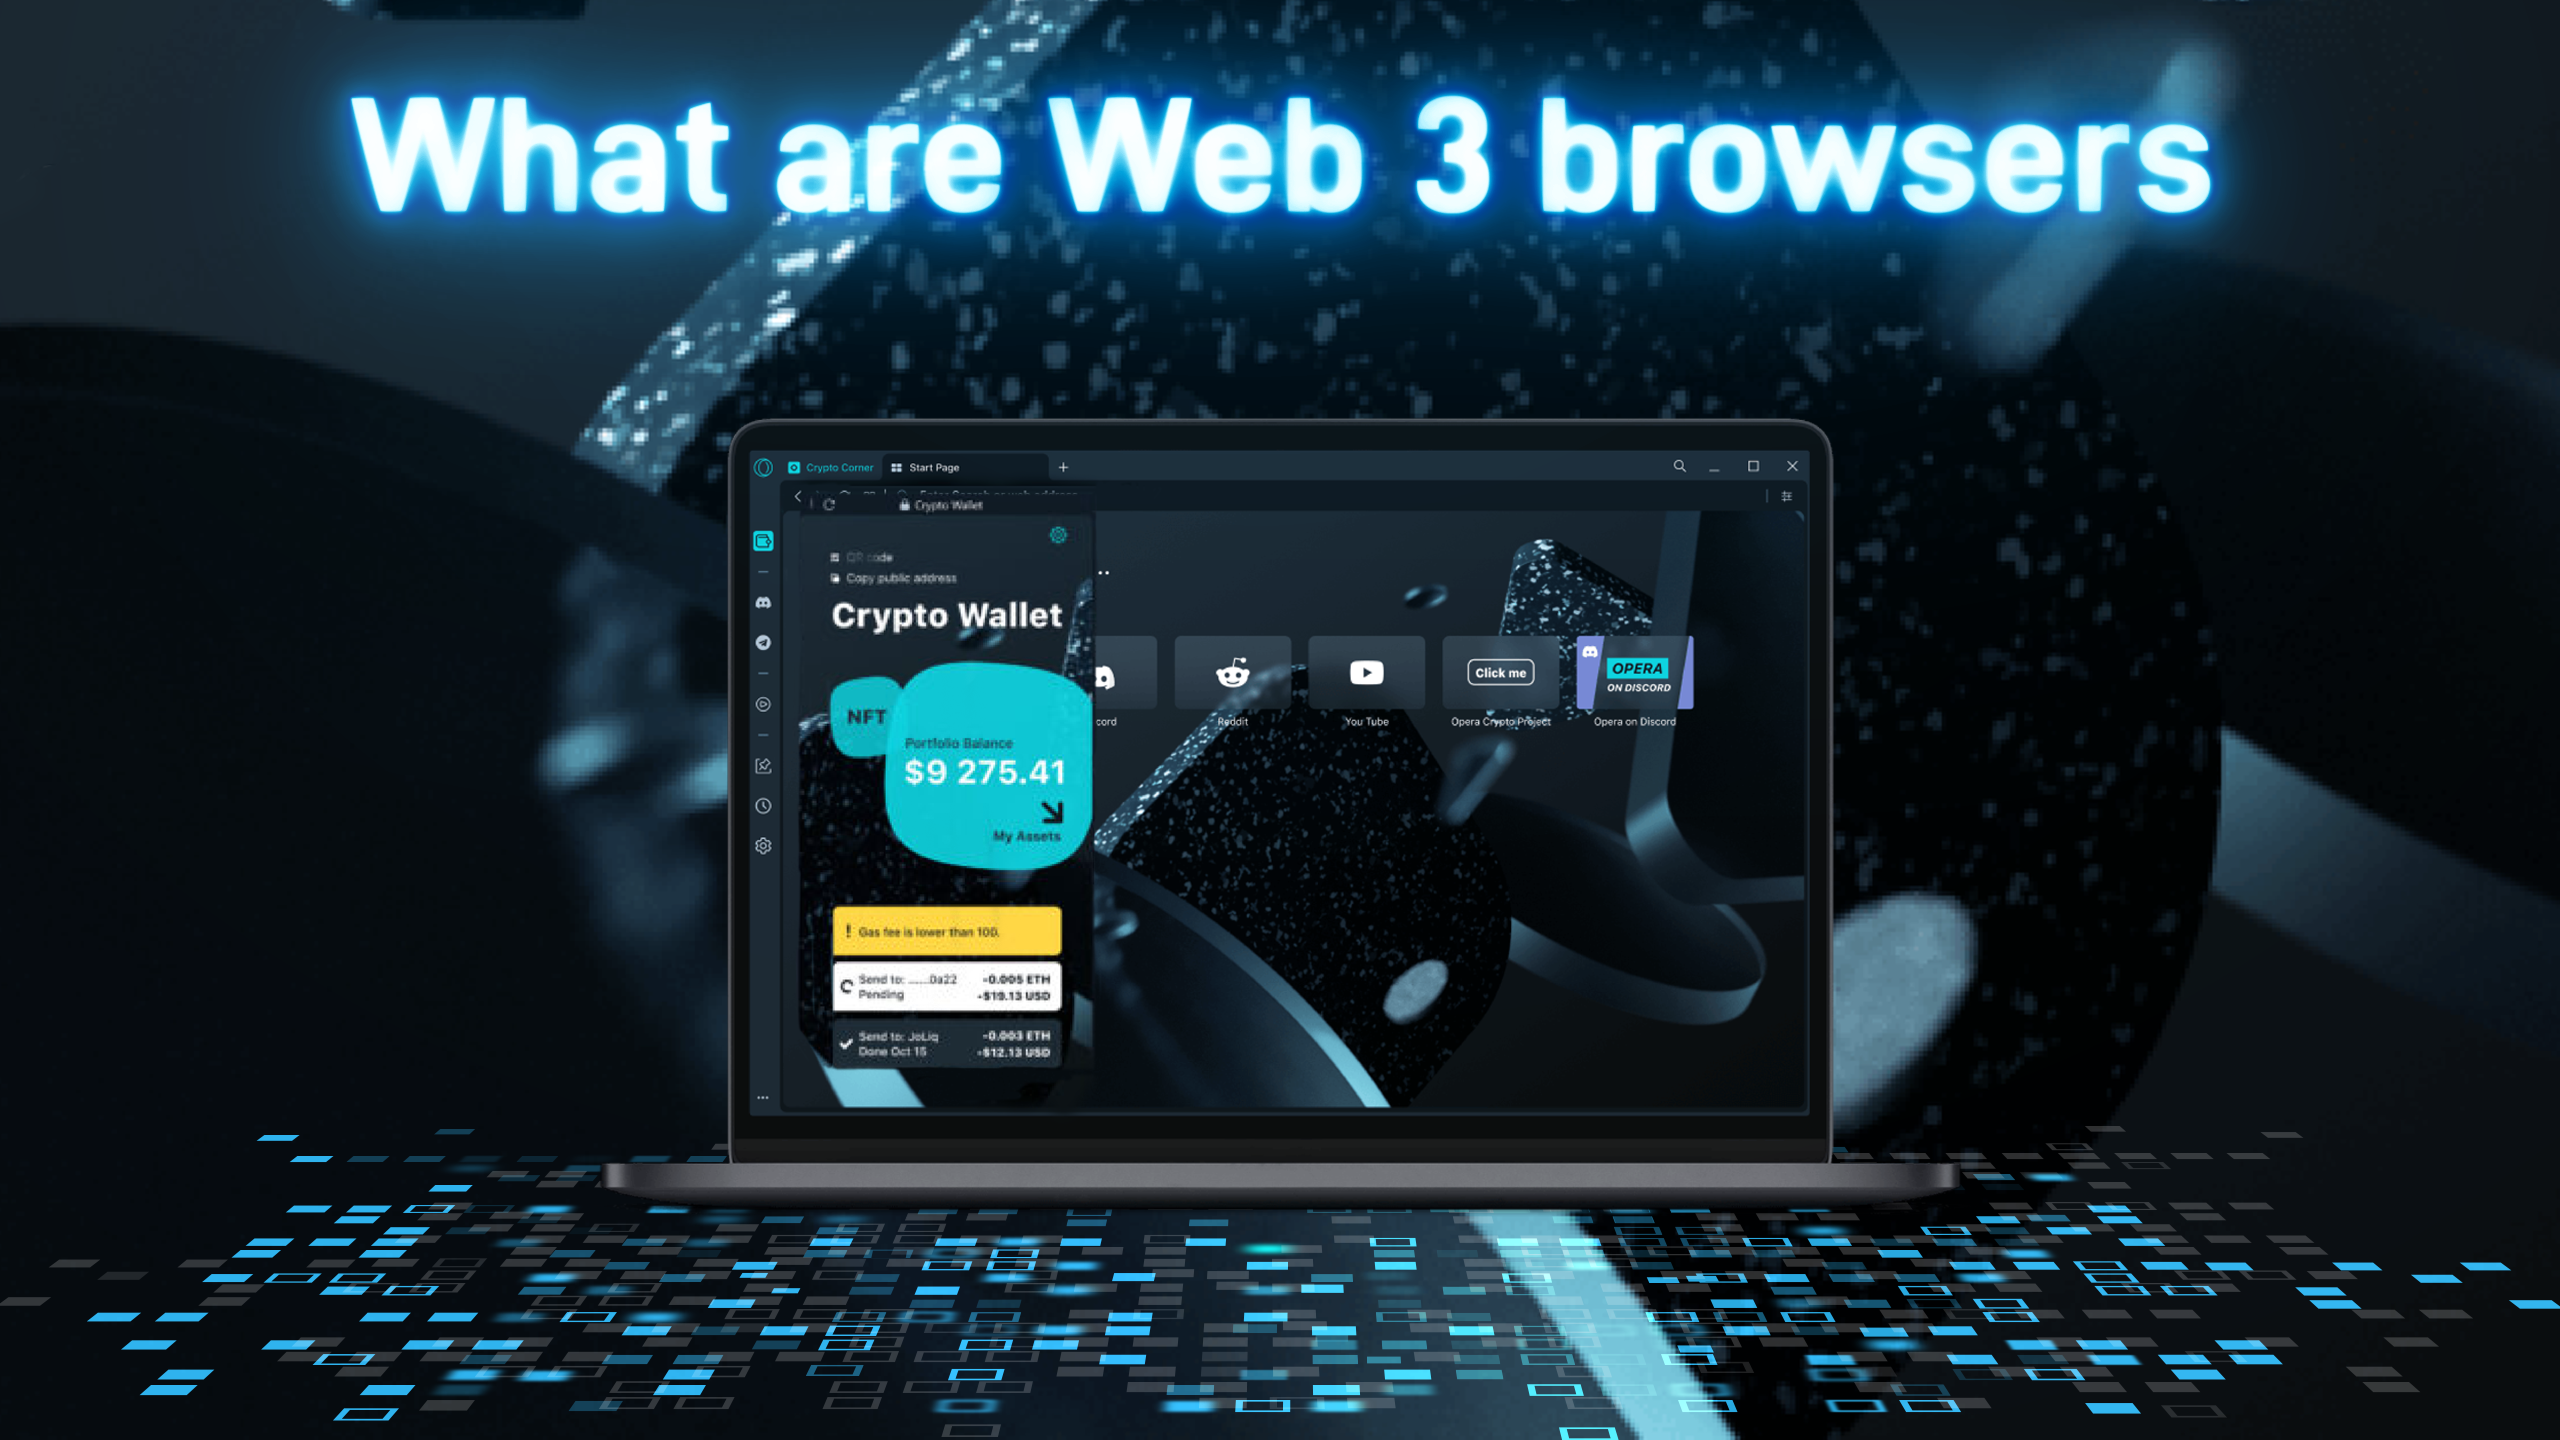 Web 3 Browsers And What You Should Know About Them